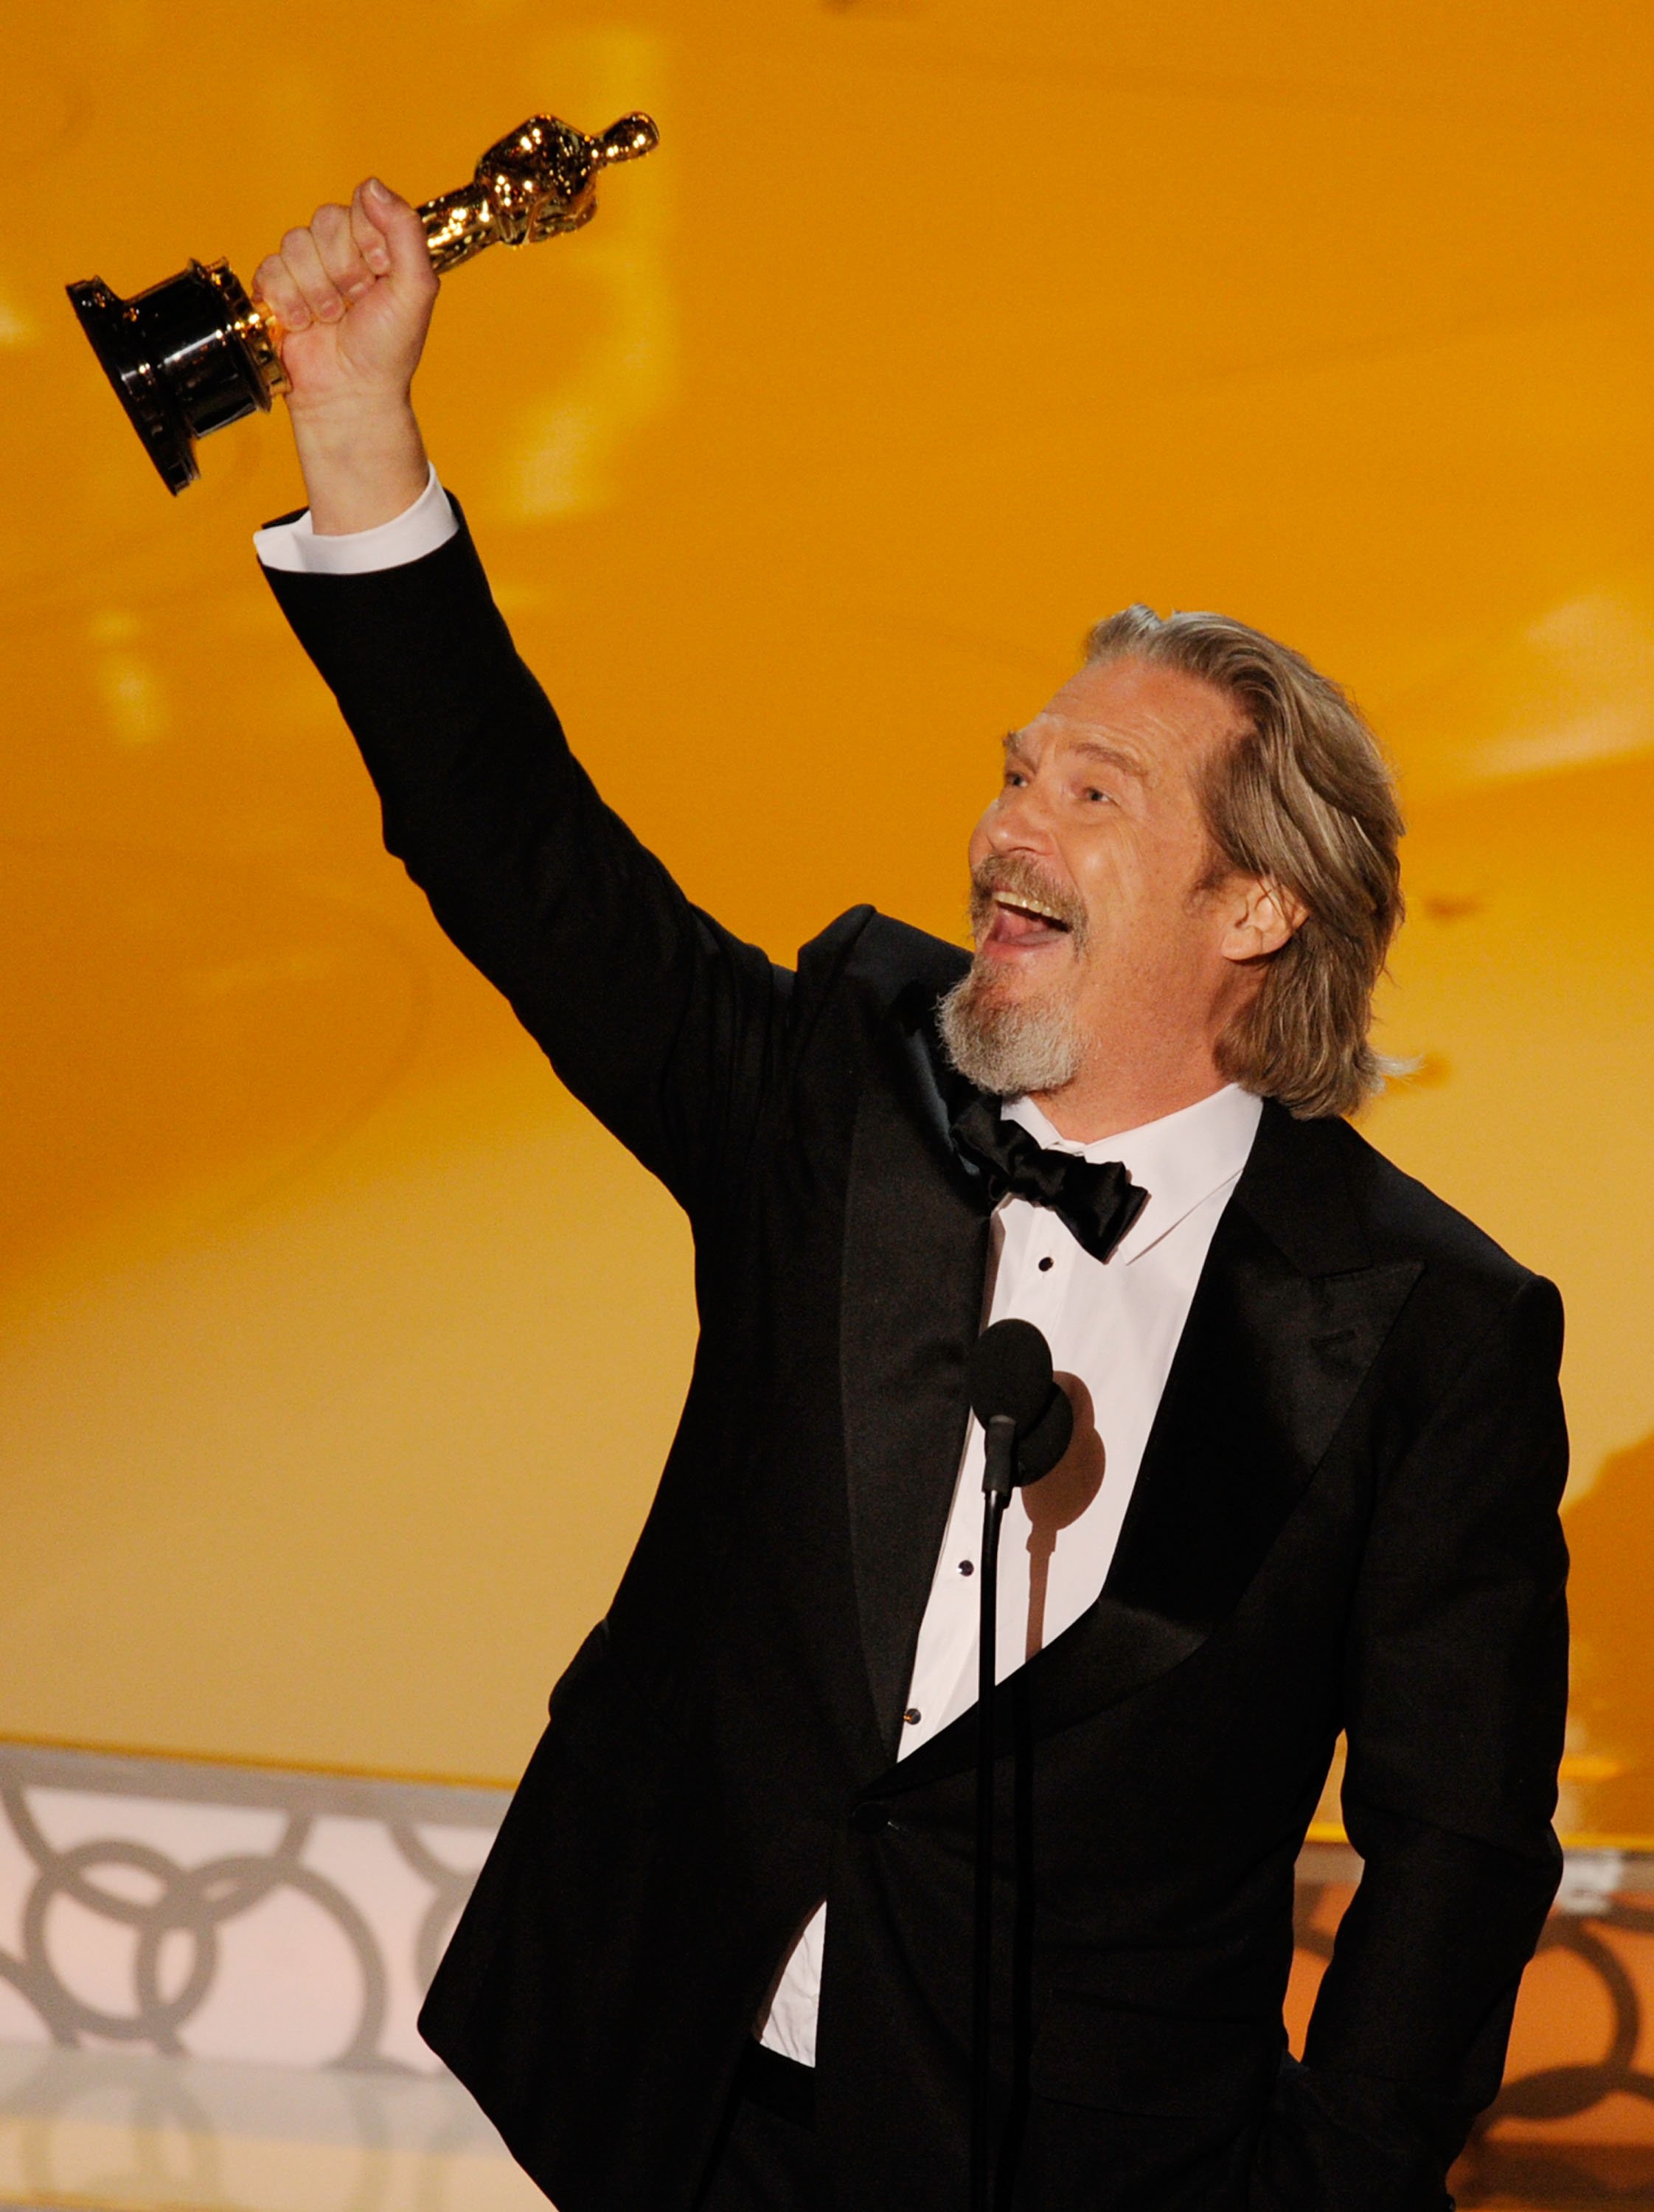  Jeff Bridges accepts Best Actor award for "Crazy Heart" during the 82nd Annual Academy Awards on March 7, 2010 | Photo: GettyImages